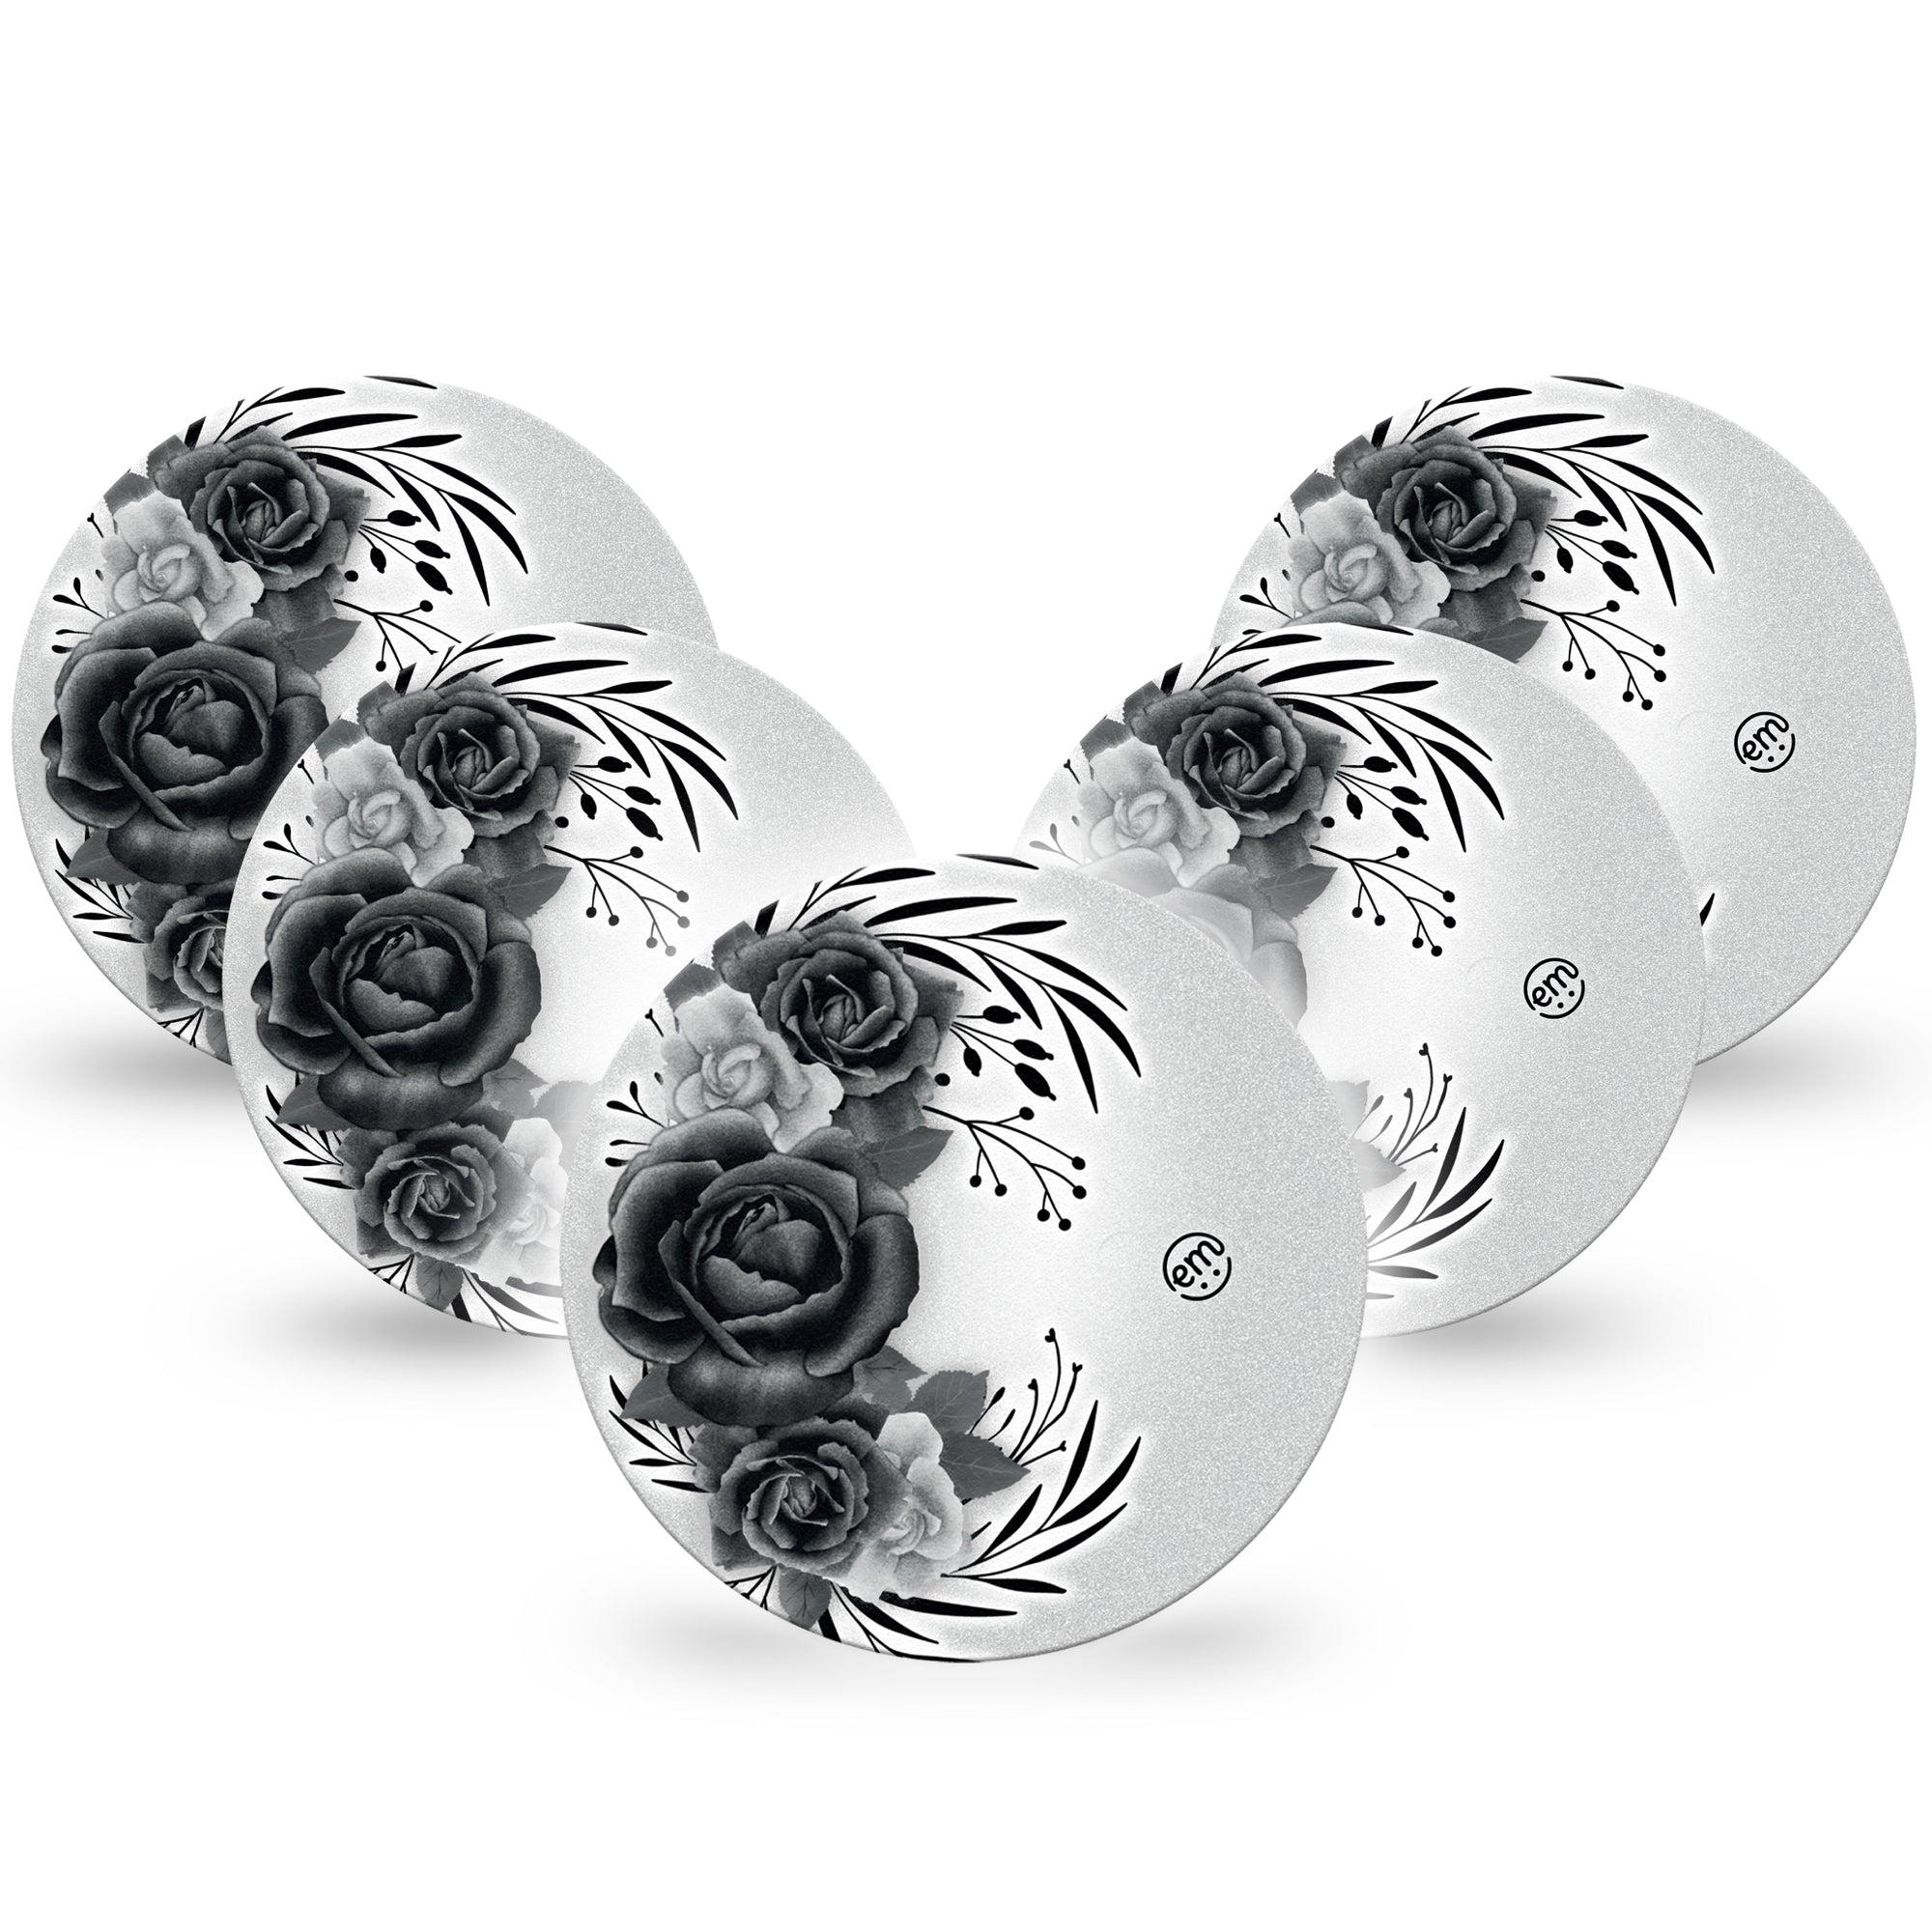 ExpressionMed Tattoo Rose Libre 2 Overpatch, 5-Pack, Black Roses Artwork Themed, CGM Plaster Tape Design